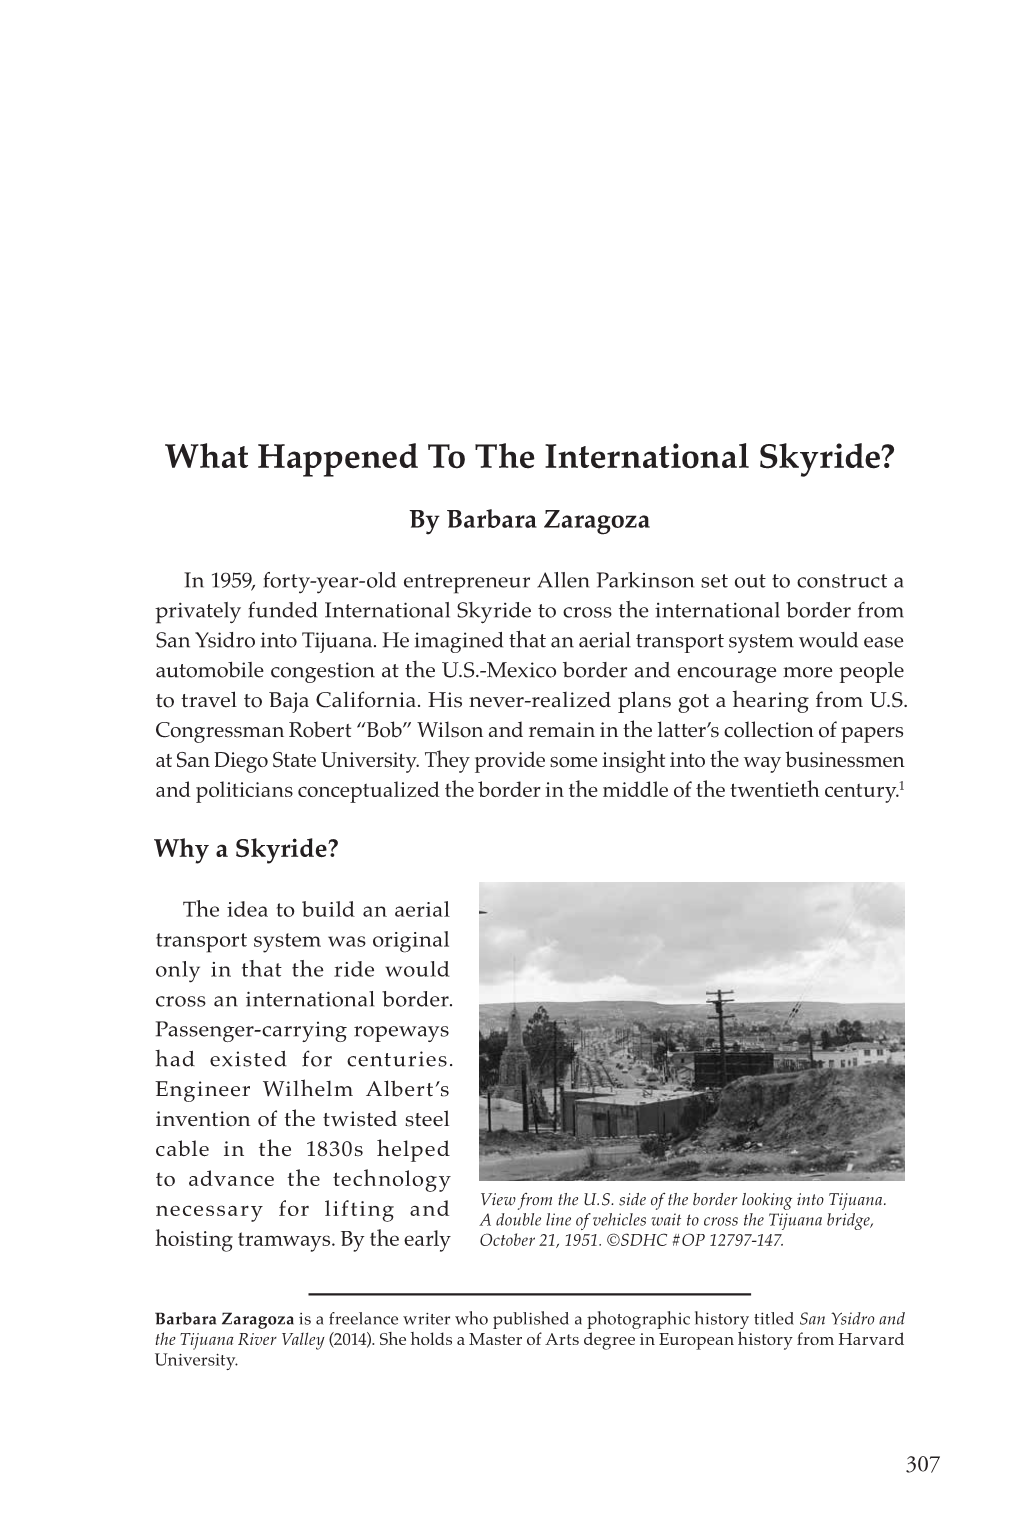 What Happened to the International Skyride?